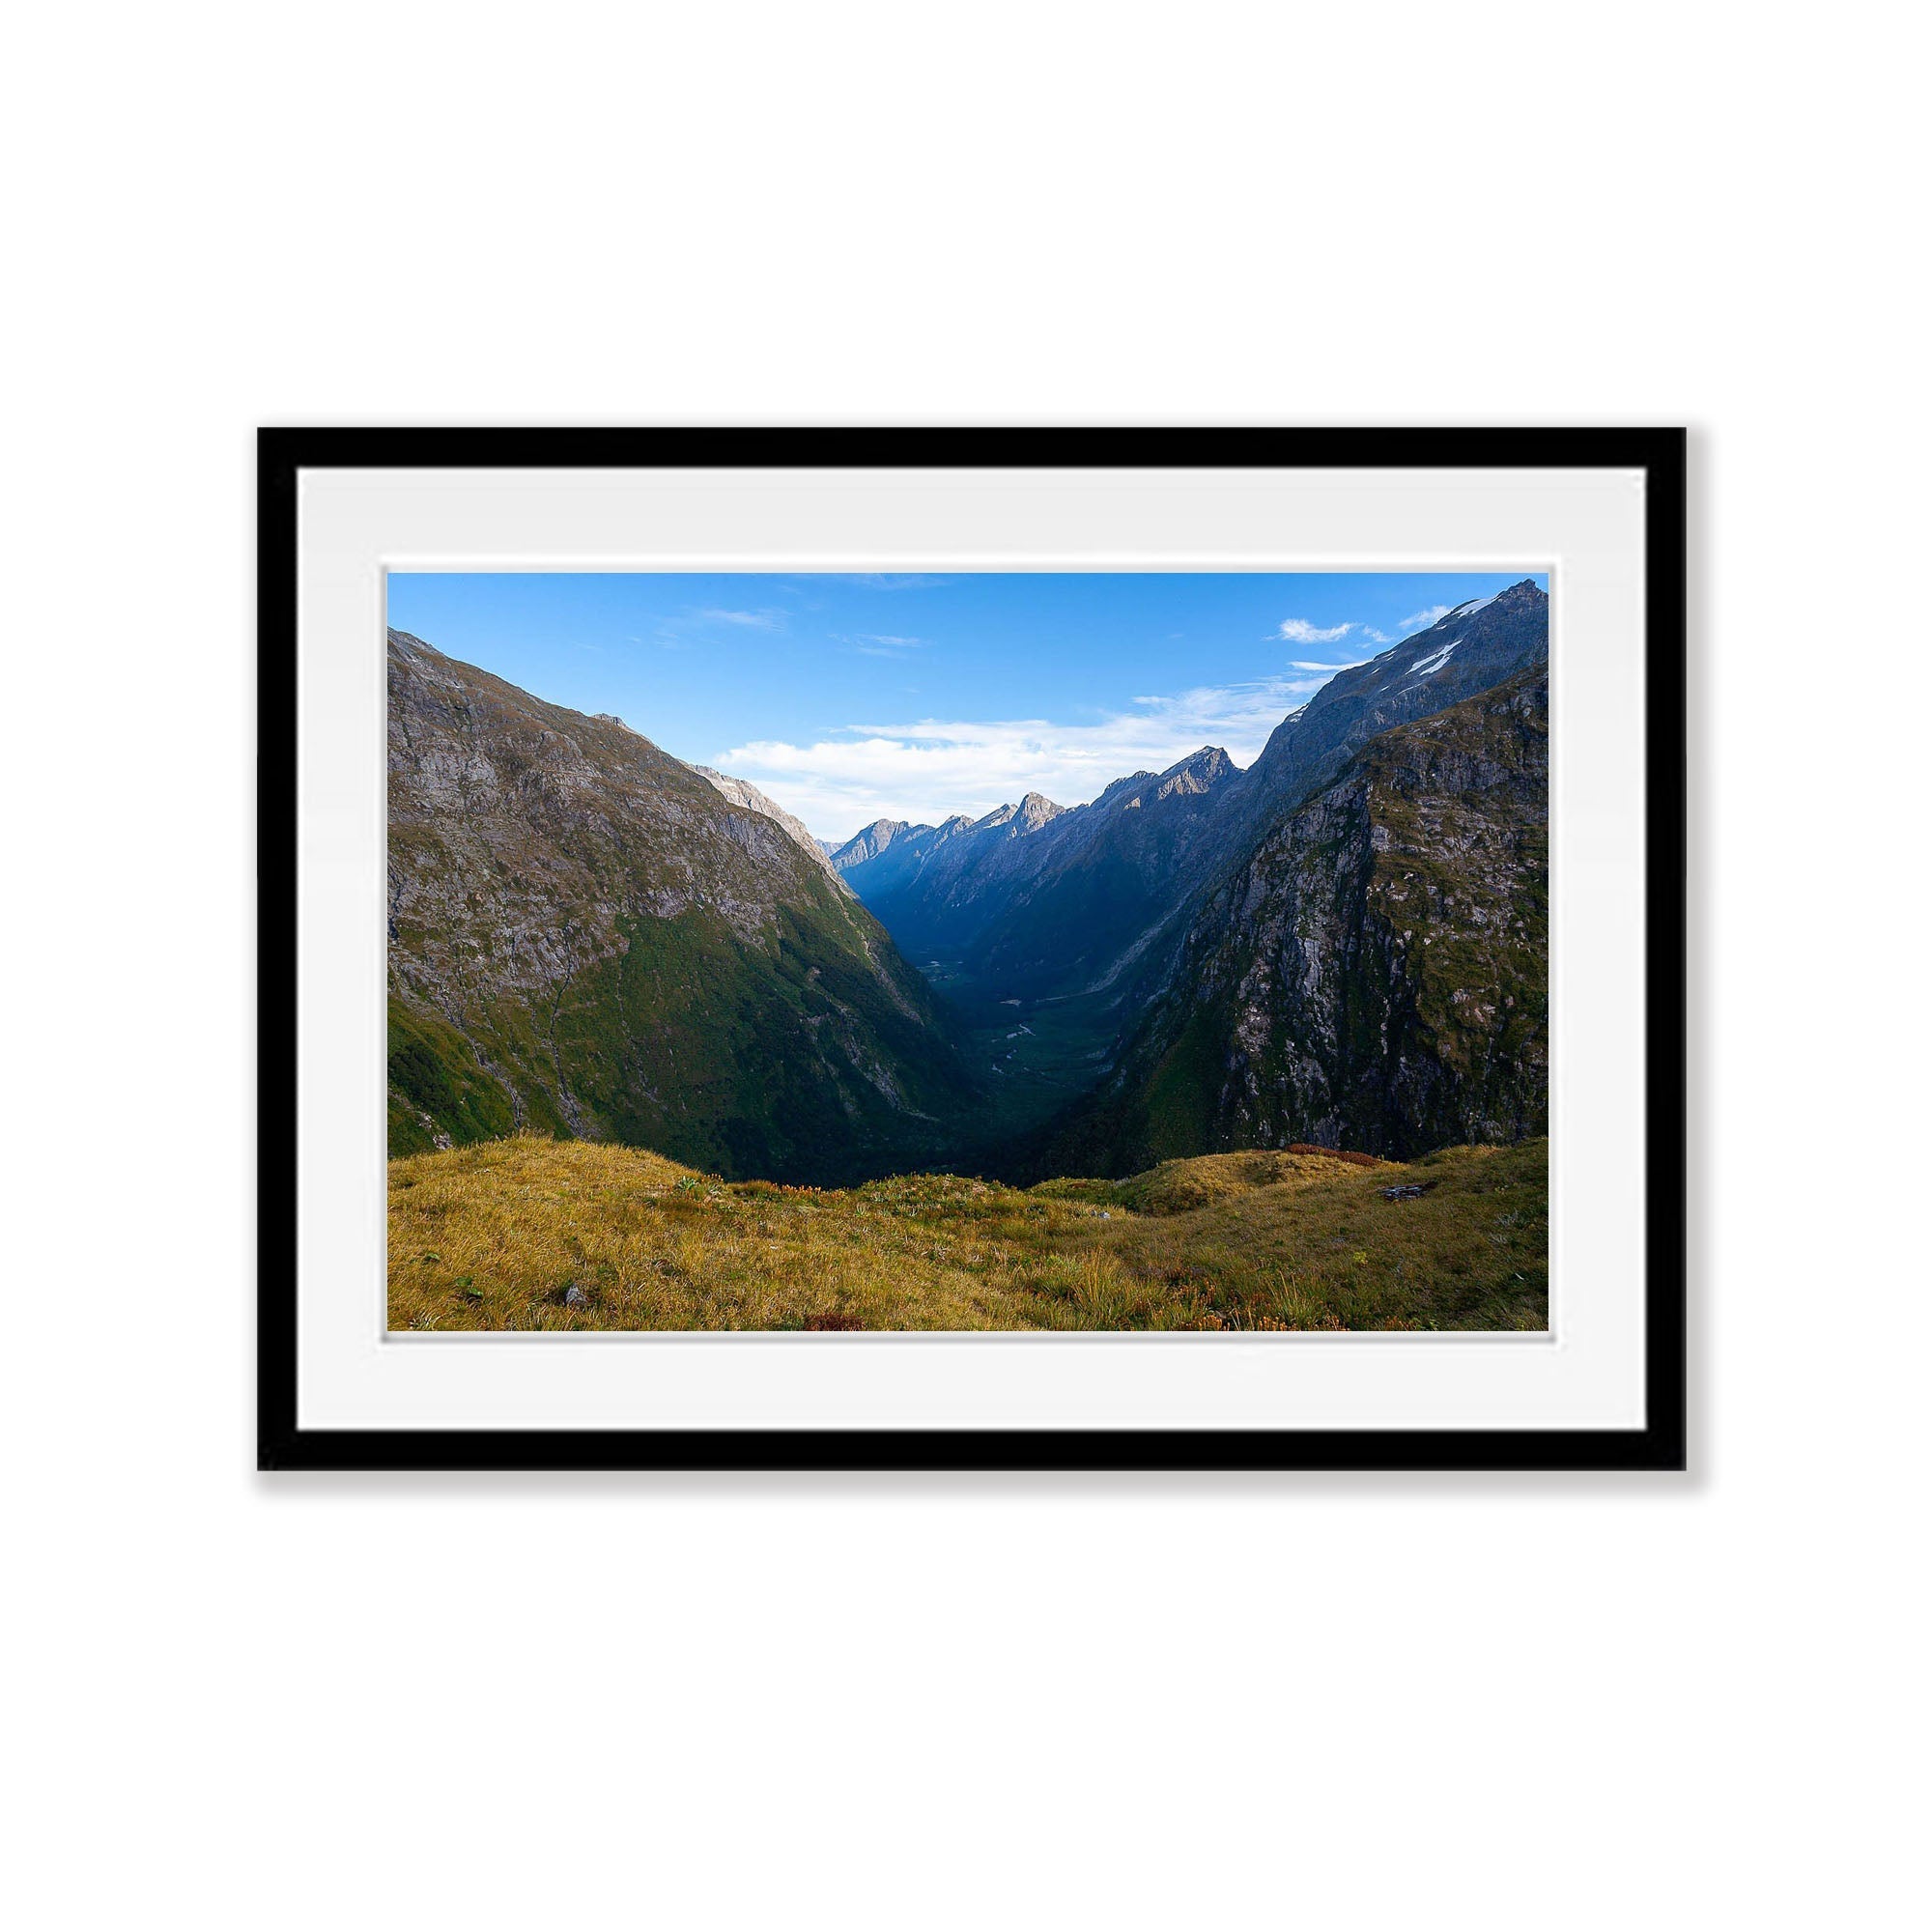 Clinton Valley, Milford Track - New Zealand